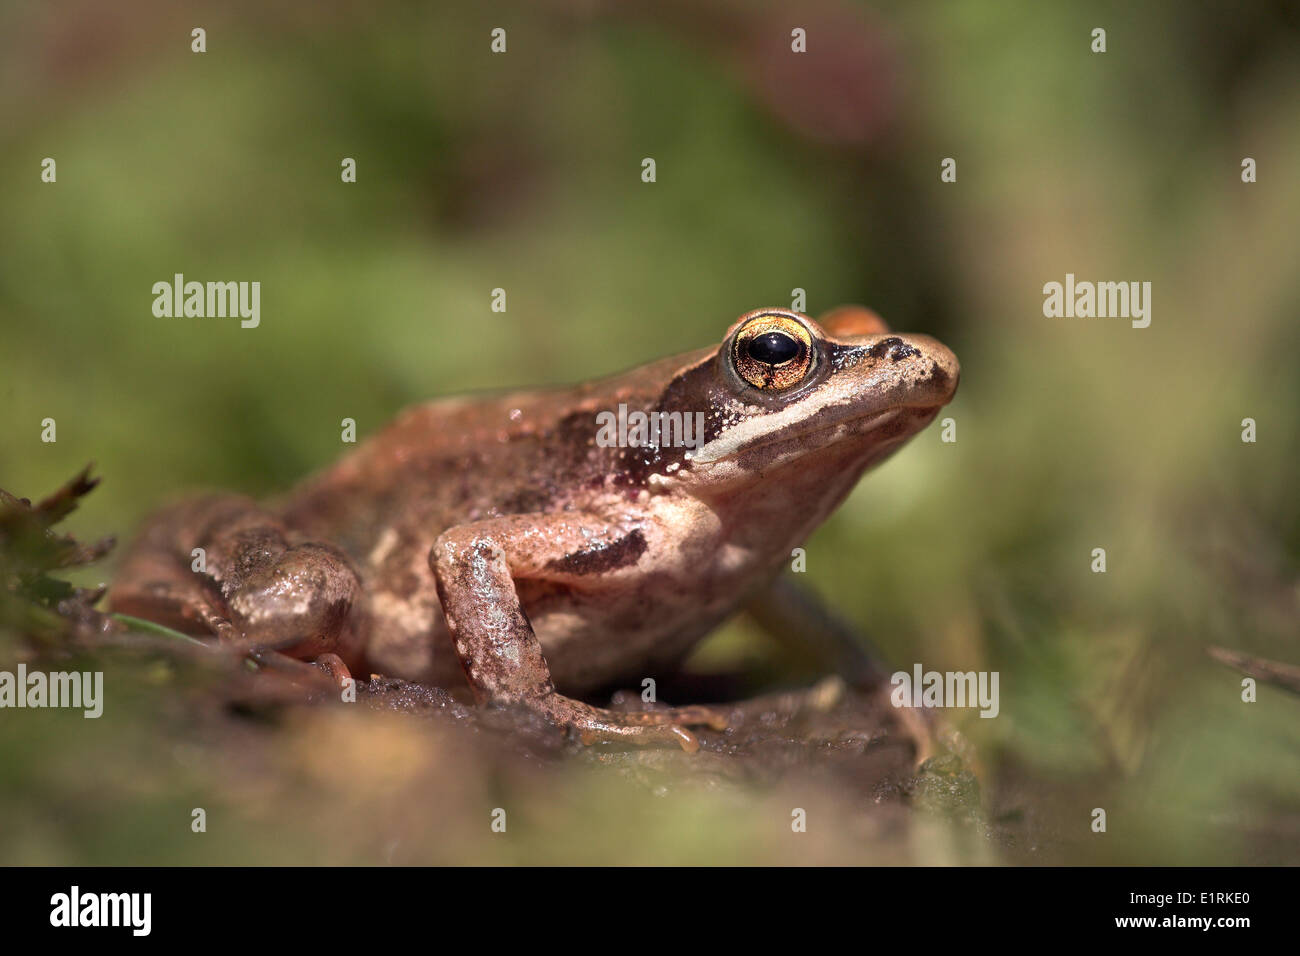 photo of an Iberian frog on land with blurred green background Stock Photo